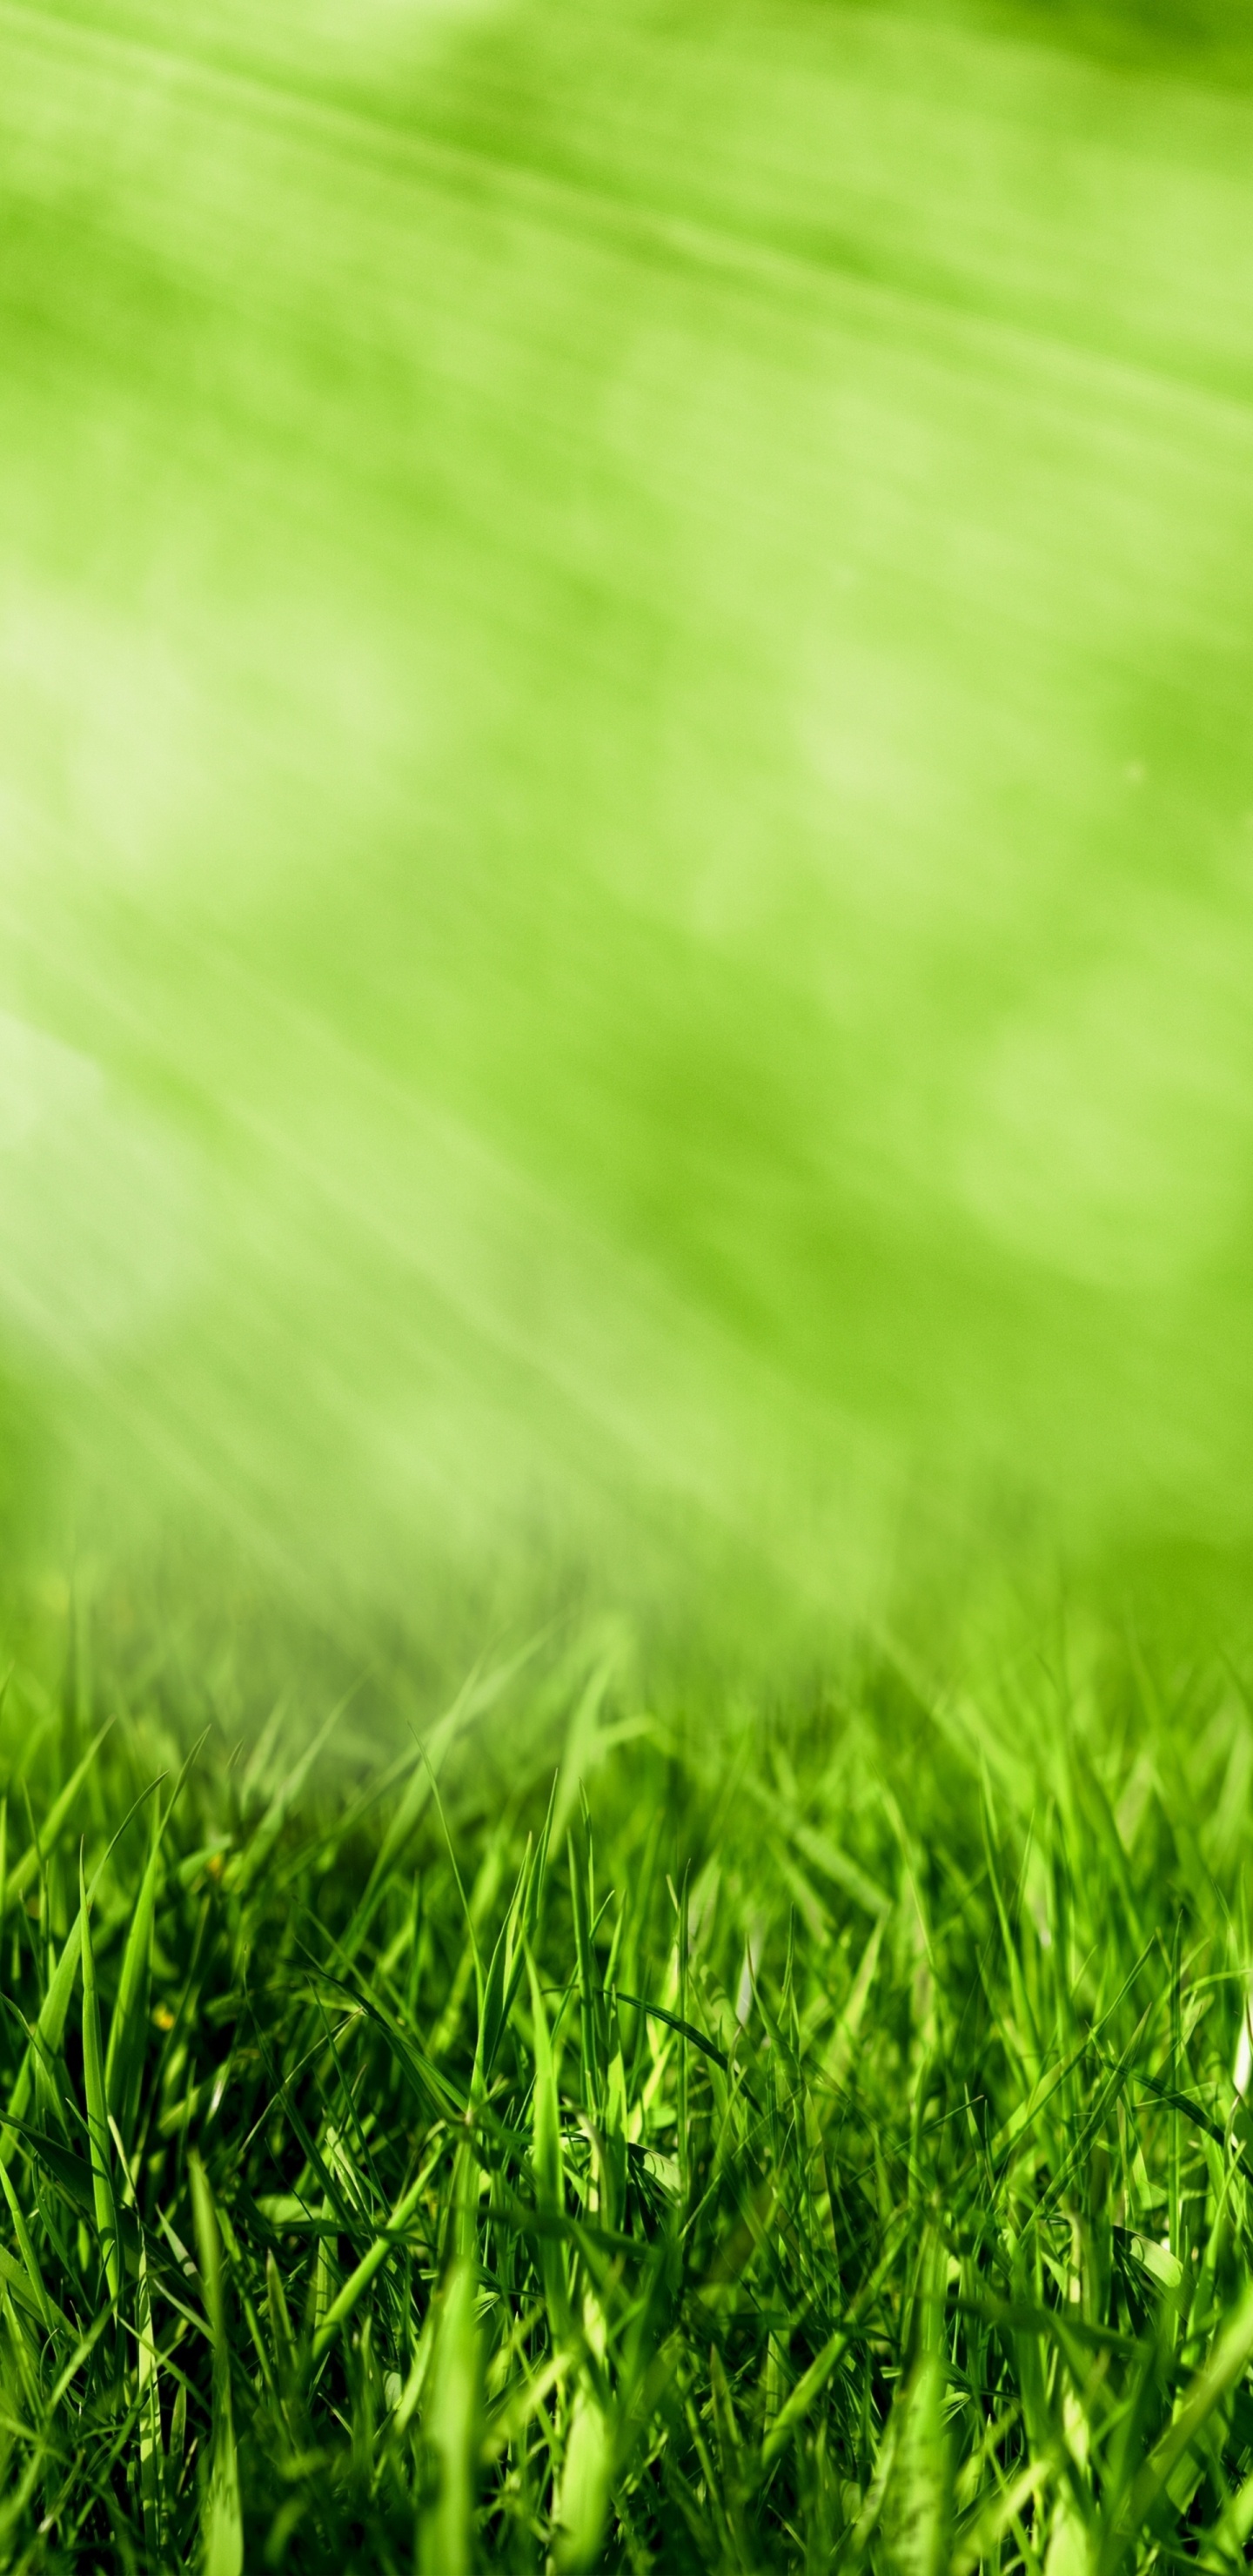 Water Droplets on Green Grass During Daytime. Wallpaper in 1440x2960 Resolution